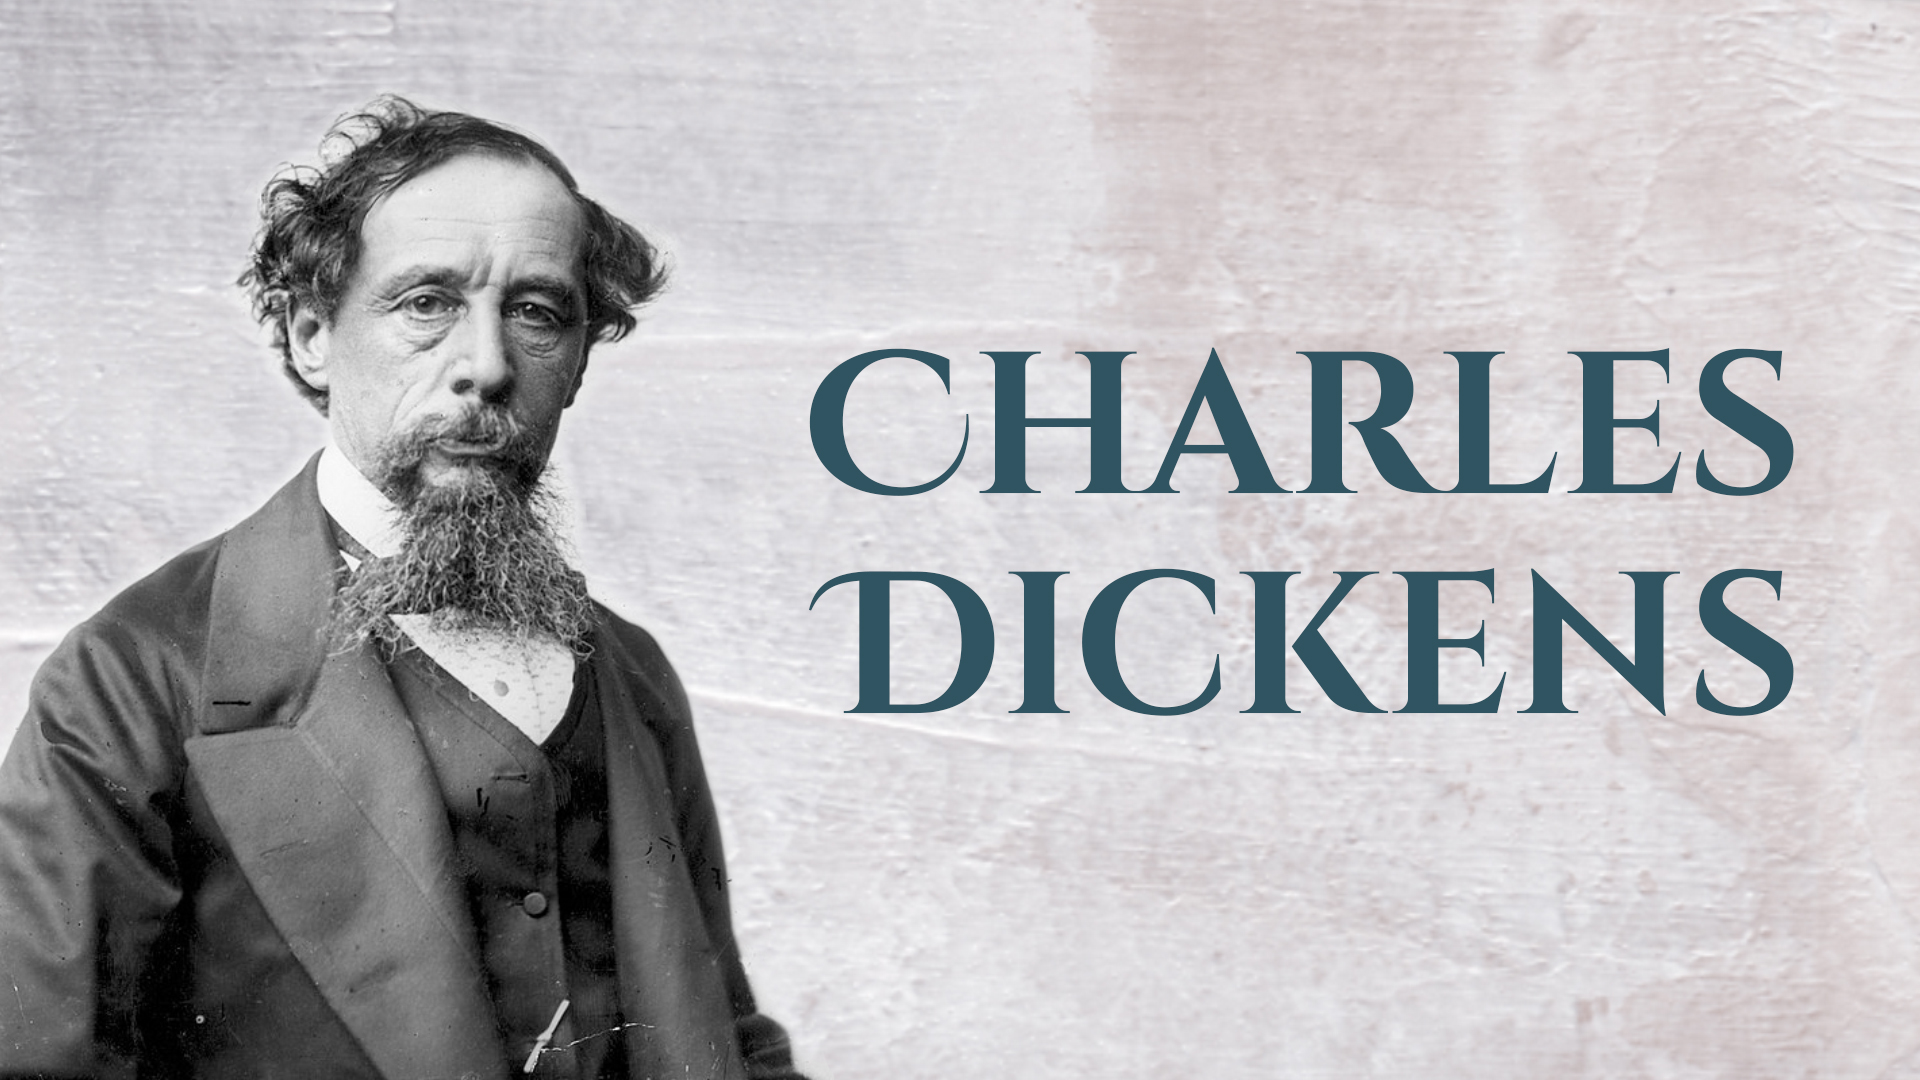 Charles Dickens Biography Resource Pack teacher made